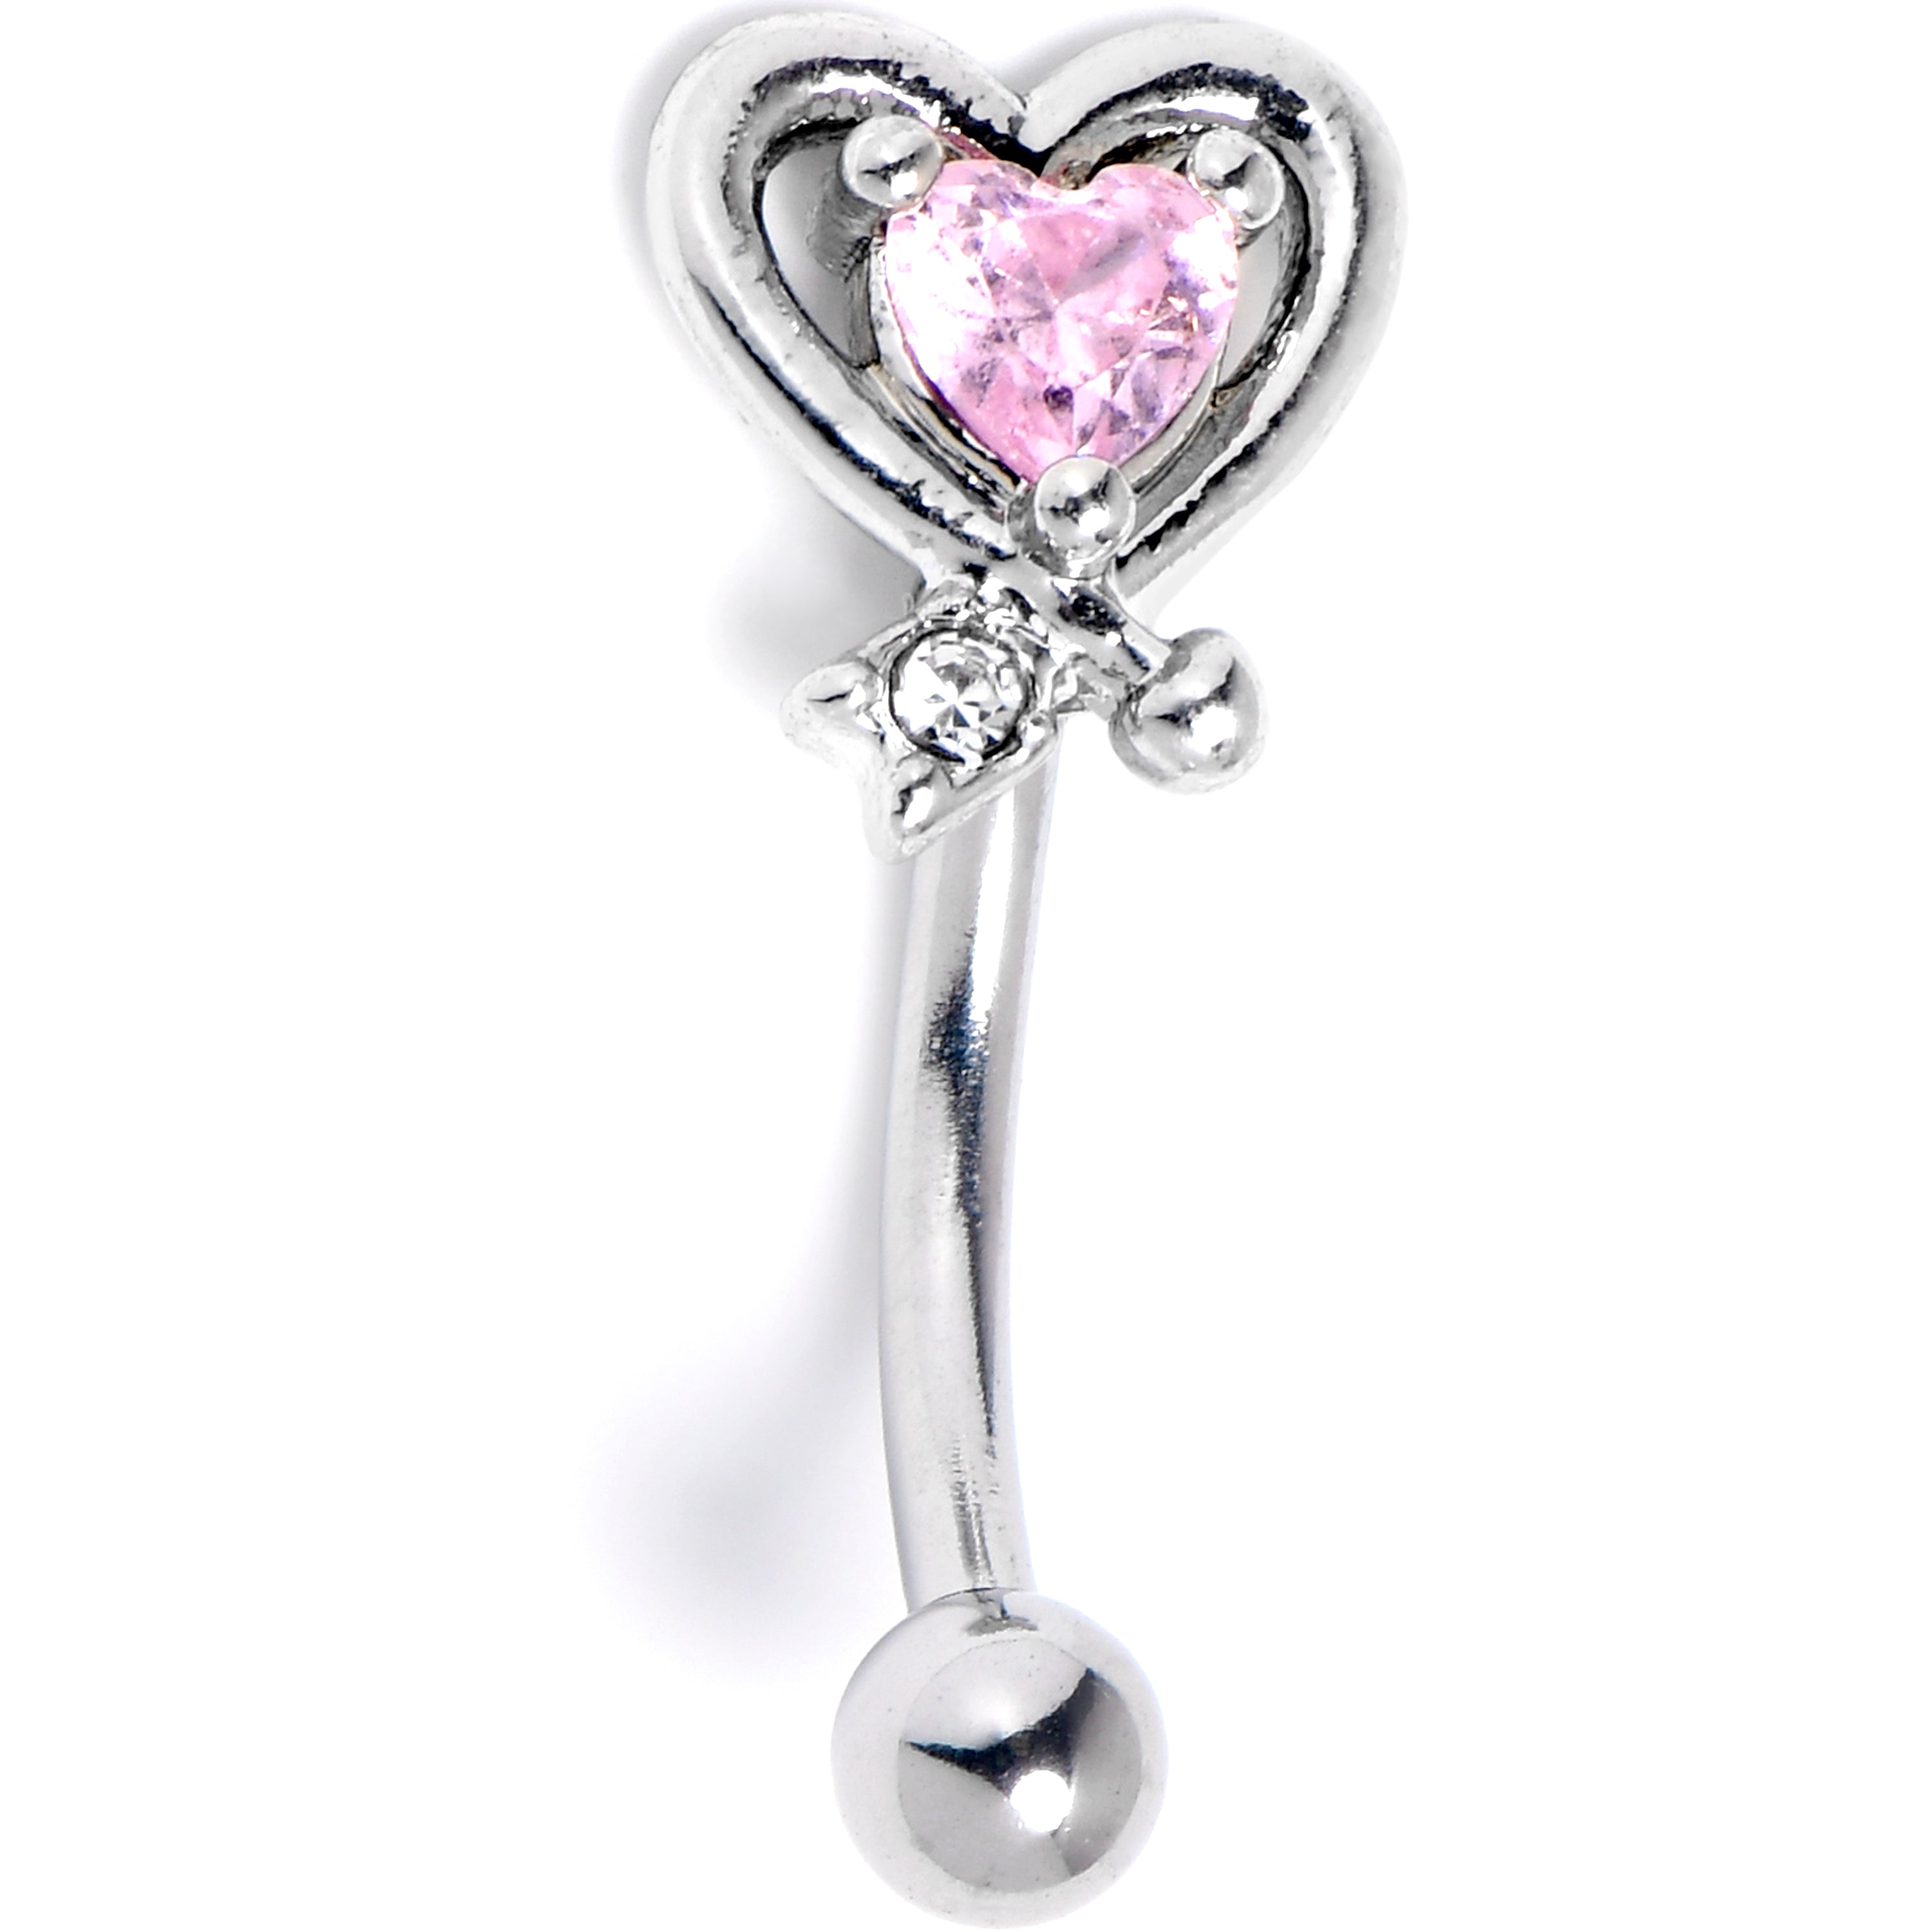 16 Gauge 5/16 Pink CZ Gem Wrapped in Heart Curved Eyebrow Ring